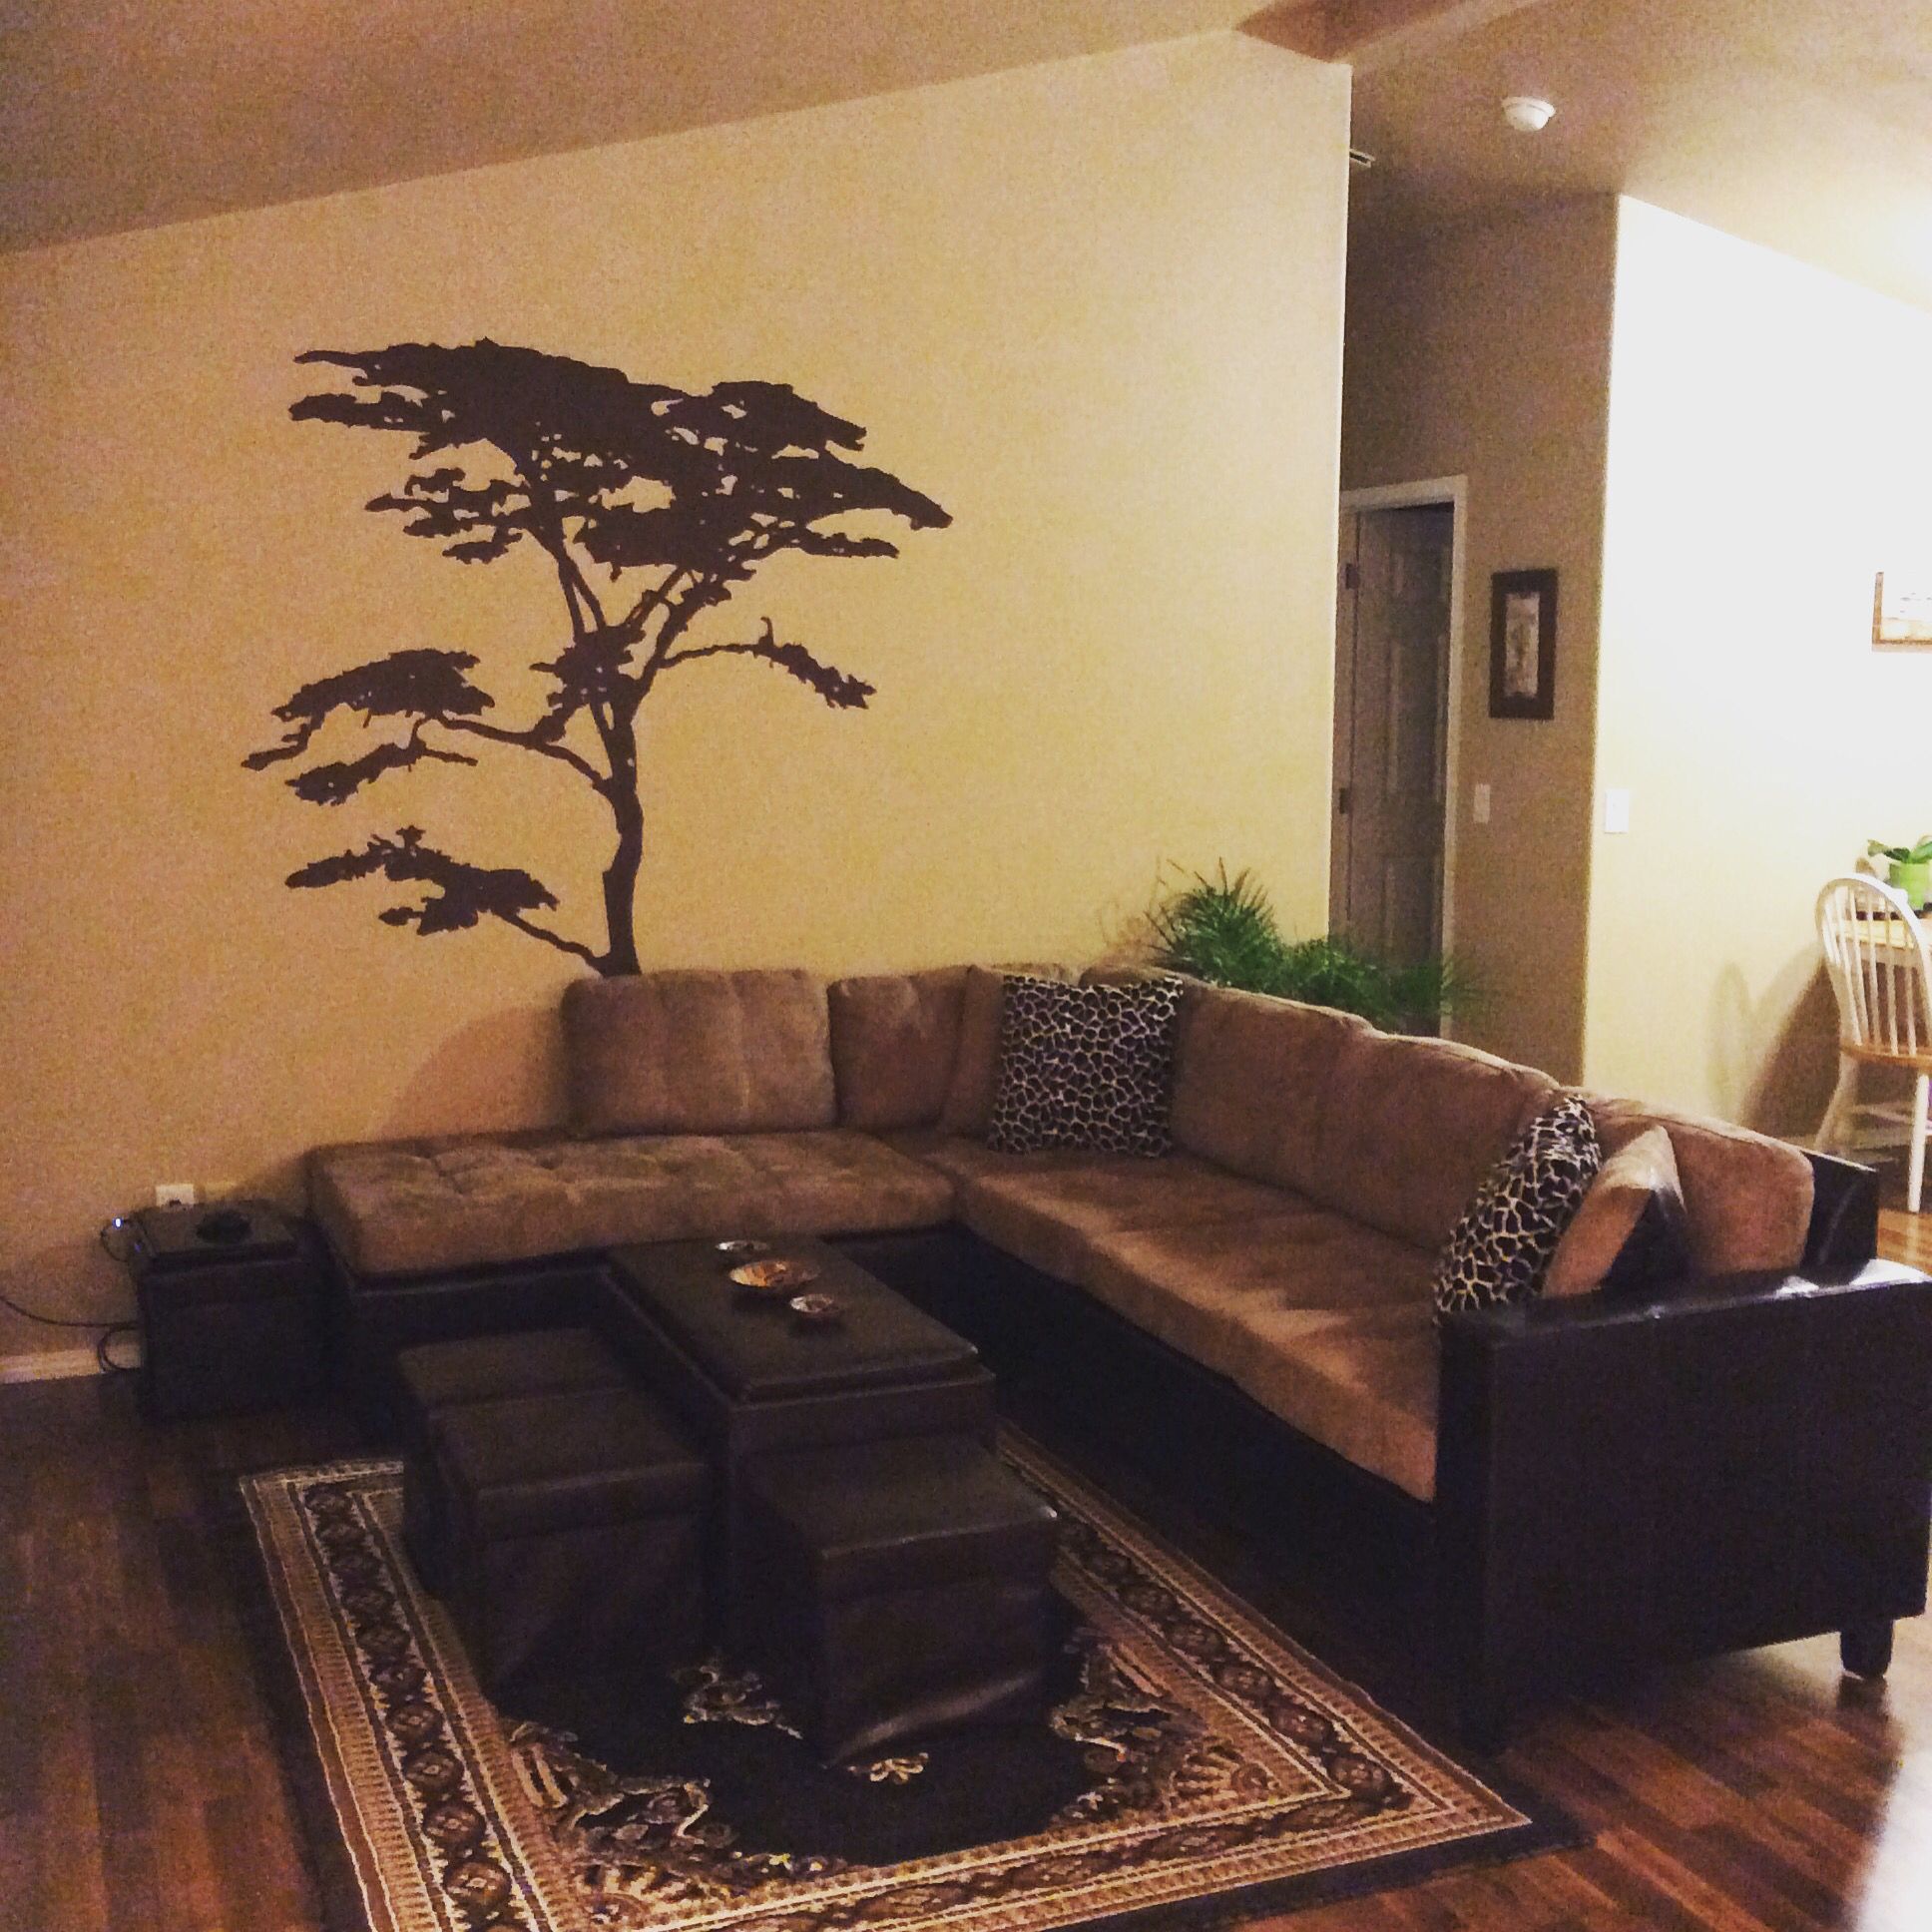 Acacia Tree Decali Like It!! | Tree Decals, Home Decor, Sectional Couch In Acacia Tree Wall Art (View 15 of 15)